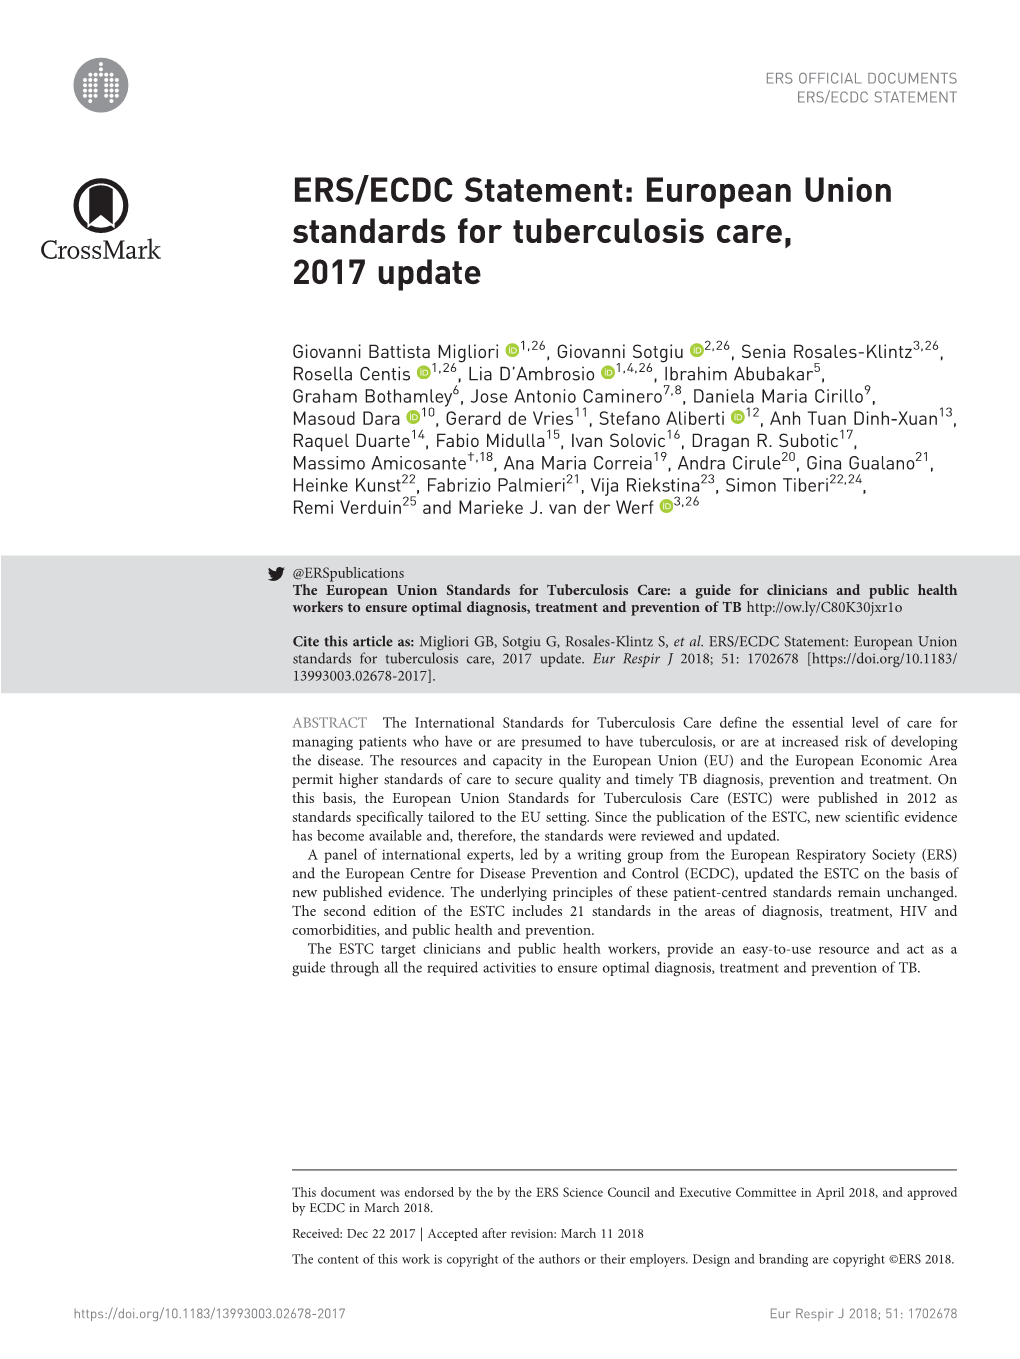 ERS/ECDC Statement: European Union Standards for Tuberculosis Care, 2017 Update